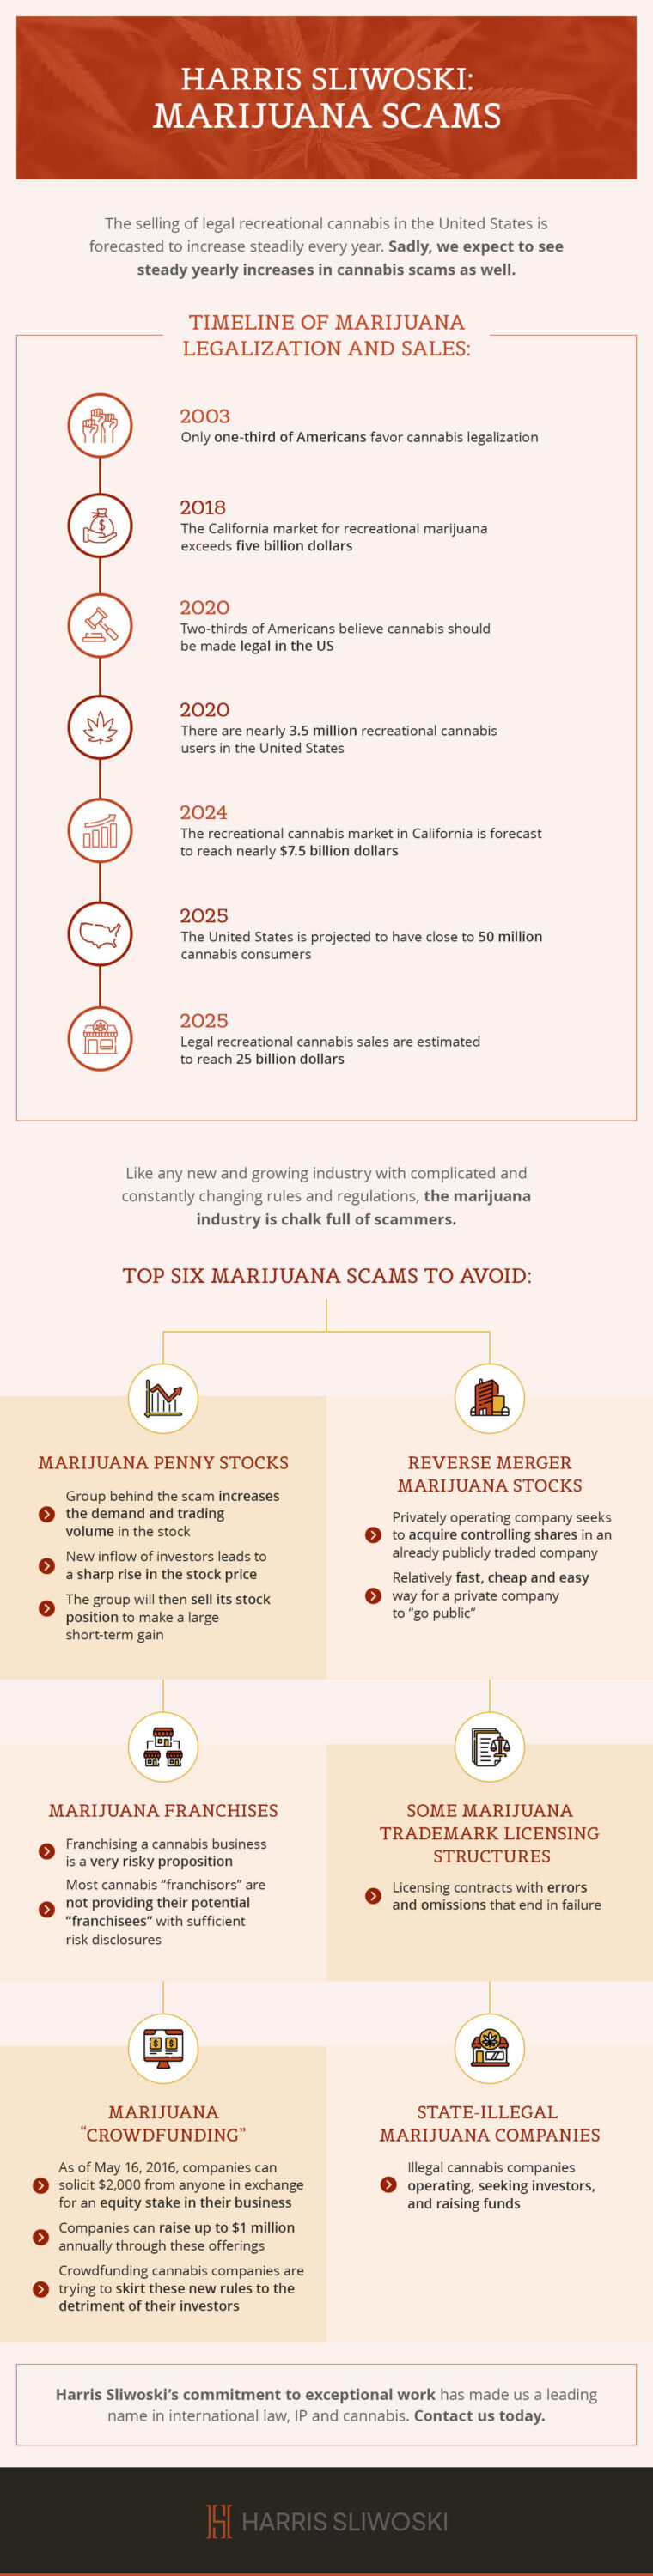 Harris SLIWOSKI: Marijuana Scams. The selling of legal recreational cannabis in the United States is forecasted to increase steadily every year. Sadly, we expect to see steady yearly increases in cannabis scams as well. Timeline of Marijuana Legalization and Sales: 2003: Only one-third of Americans favor cannabis legalization. 2018: The California market for recreational marijuana exceeds five billion dollars. 2020: Two-thirds of Americans believe cannabis should be made legal in the US. 2020: There are nearly 3.5 million recreational cannabis users in the United States. 2024: The recreational cannabis market in California is forecast to reach nearly $7.5 billion dollars. 2025: The United States is projected to have close to 50 million cannabis consumers. 2025: Legal recreational cannabis sales are estimated to reach 25 billion dollars. Like any new and growing industry with complicated and constantly changing rules and regulations, the marijuana industry is chalk full of scammers. Top Six Marijuana Scams to Avoid: 1: Marijuana penny stocks. Group behind the scam increases the demand and trading volume in the stock. New inflow of investors leads to a sharp rise in the stock price. The group will then sell its stock position to make a large short-term gain. 2: Reverse merger marijuana stocks. Privately operating company seeks to acquire controlling shares in an already publicly traded company. Relatively fast, cheap and easy way for a private company to “go public”. 3: Marijuana franchises. Franchising a cannabis business is a very risky proposition. Most cannabis “franchisors” are not providing their potential “franchisees” with sufficient risk disclosures. 4: Some marijuana trademark licensing structures. Licensing contracts with errors and omissions that end in failure. 5: Marijuana “crowdfunding”. As of May 16, 2016, companies can solicit $2,000 from anyone in exchange for an equity stake in their business. Companies can raise up to $1 million annually through these offerings. Crowdfunding cannabis companies are trying to skirt these new rules to the detriment of their investors. 6: State-illegal marijuana companies. Illegal cannabis companies operating, seeking investors, and raising funds. Harris Sliwoski’s commitment to exceptional work has made us a leading name in international law, IP and cannabis. Contact us today.